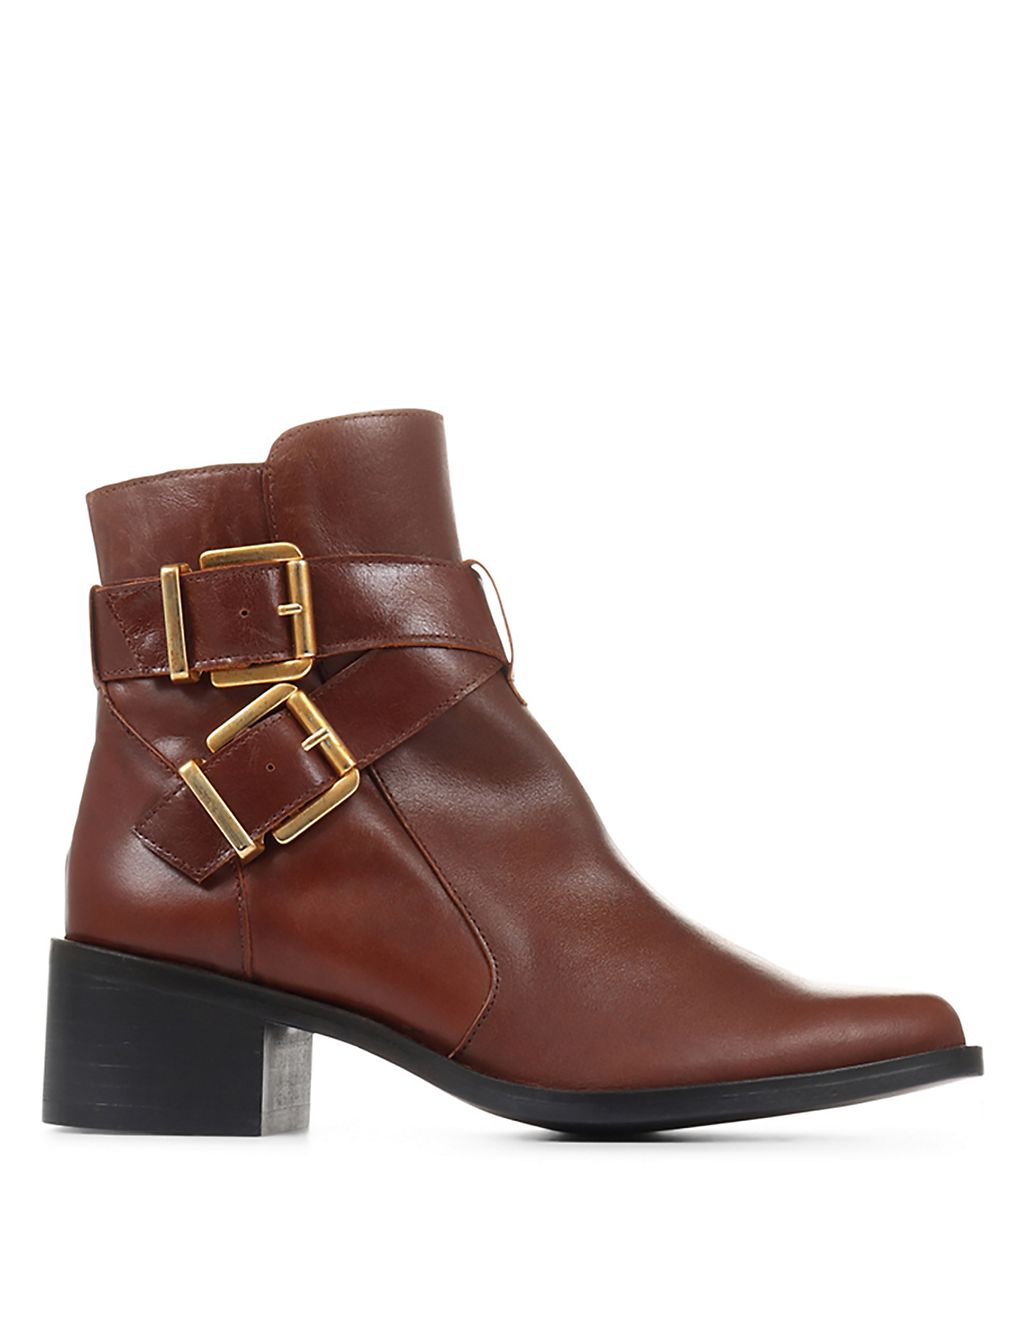 Leather Buckle Block Heel Ankle Boots 4 of 6